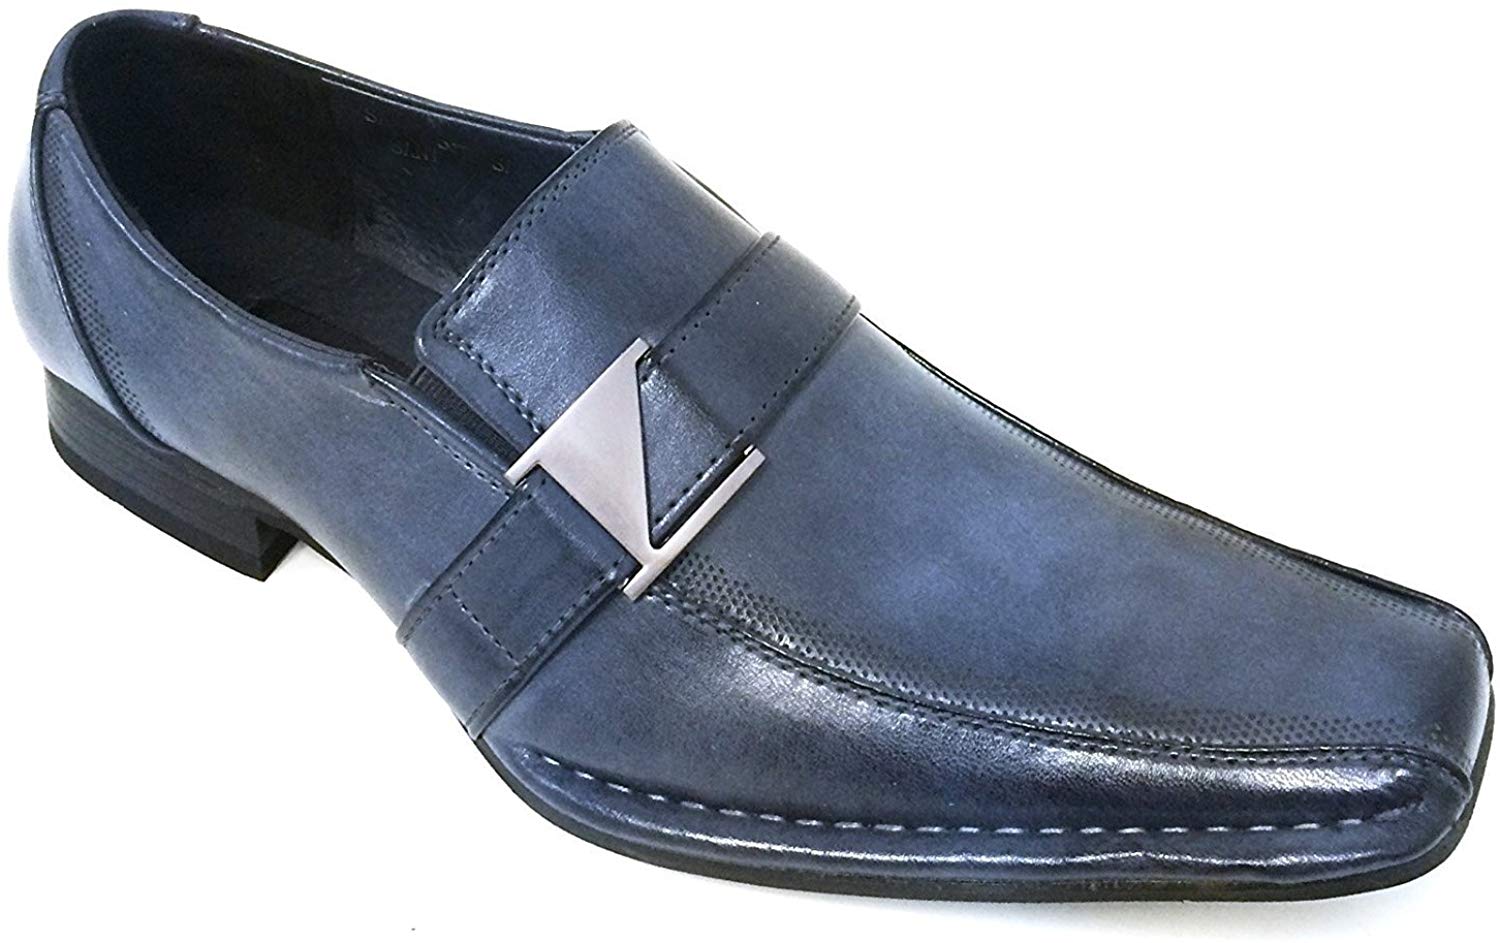 Men's Dress Shoes Fashion Elastic Slip On Buckle Formal Casual Loafers - image 1 of 4